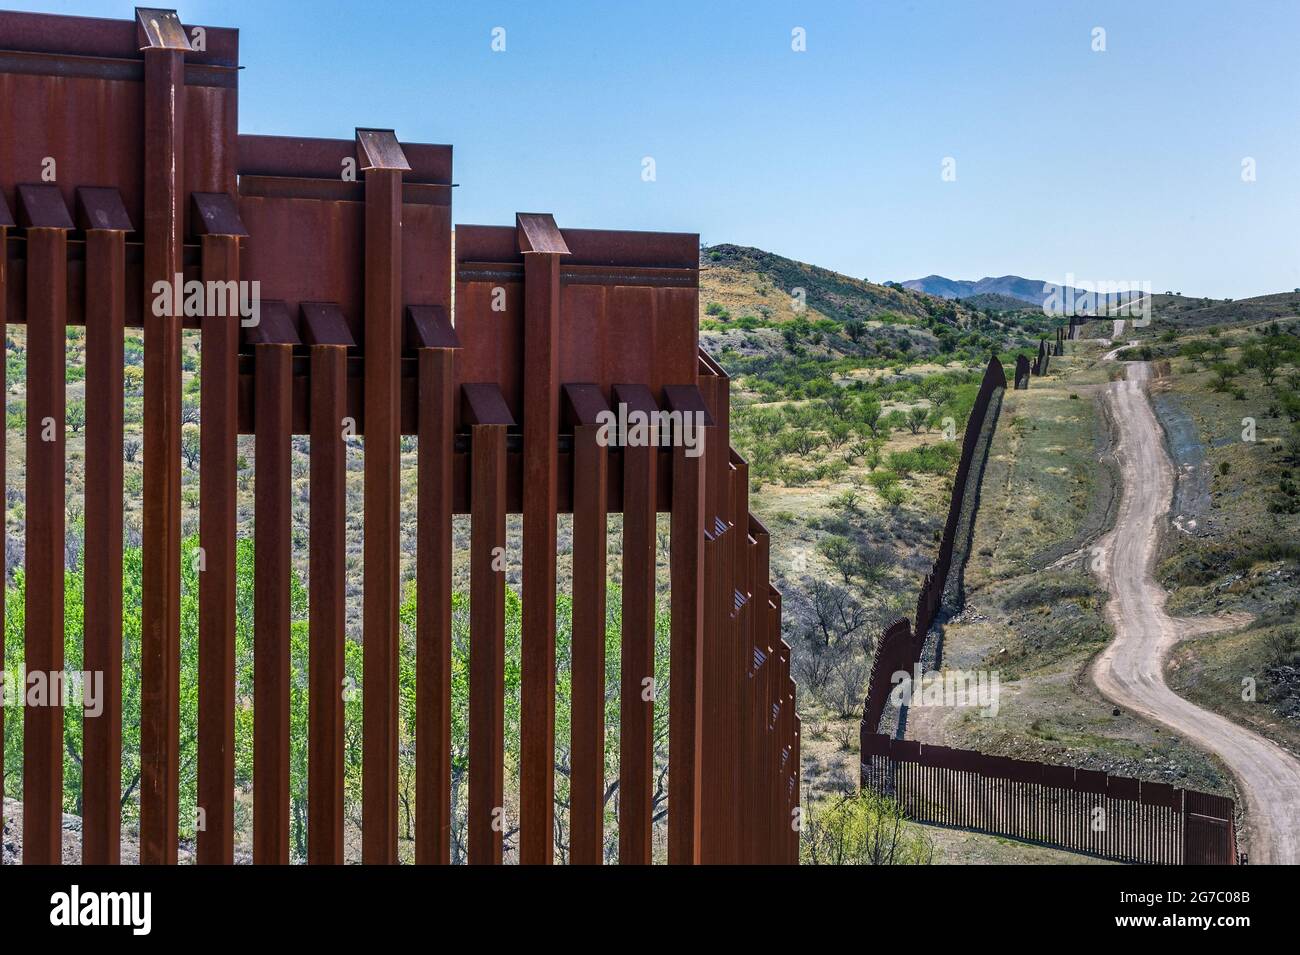 View from a hilltop of US border fence on the Mexico border, east of Nogales Arizona USA, and Nogales Sonora Mexico, viewed from US side. This type of Stock Photo